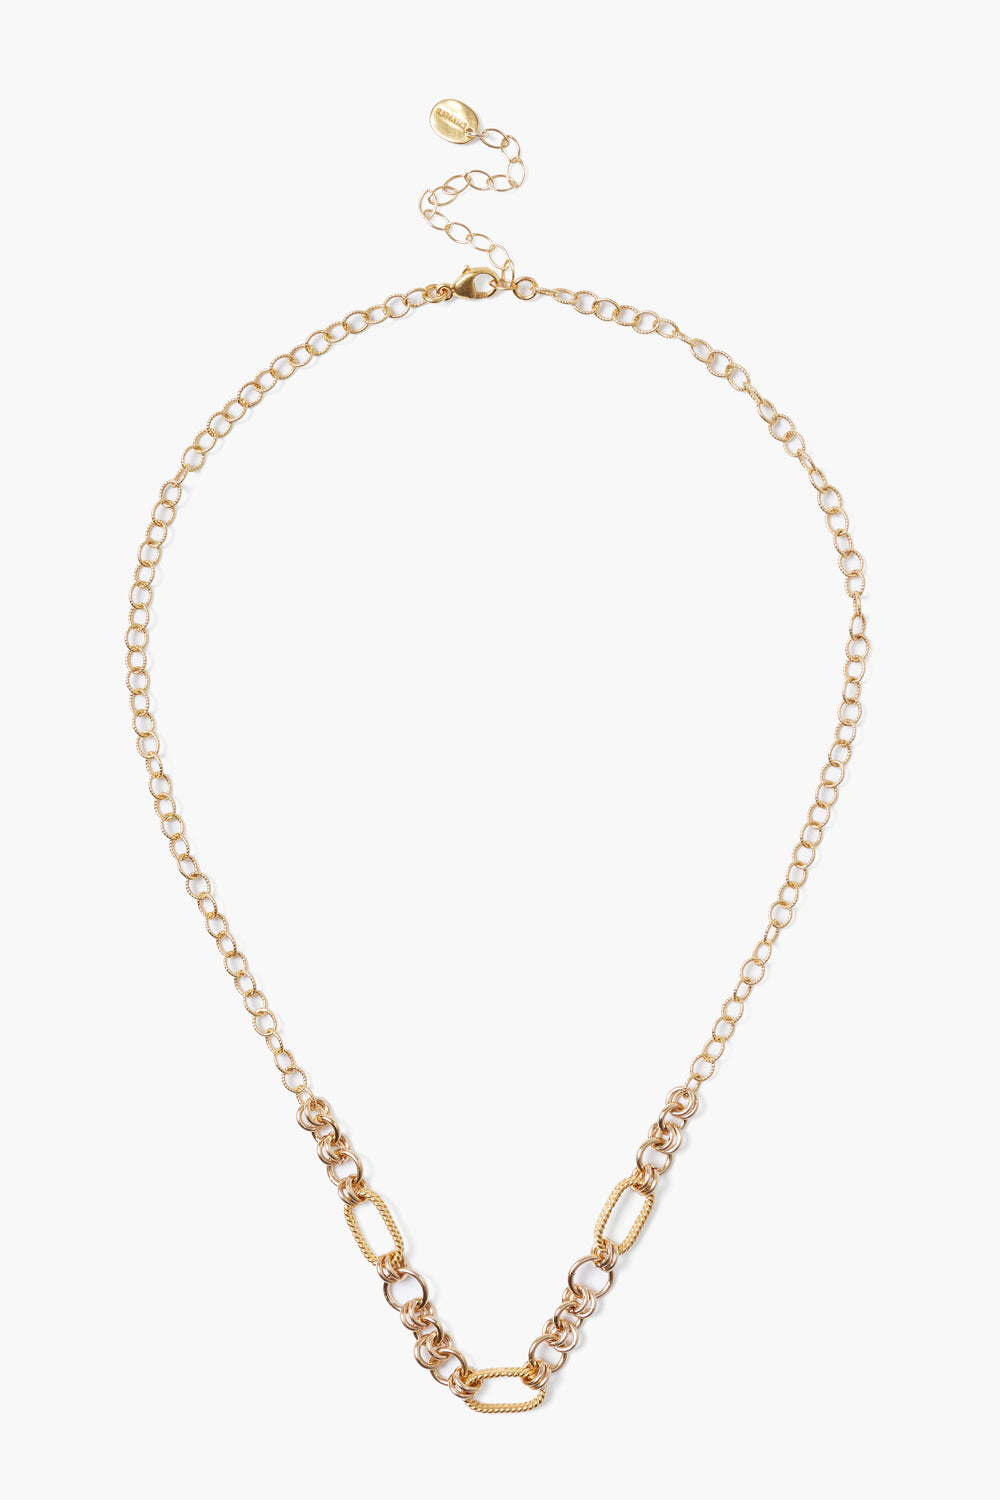 YELLOW GOLD TEXTURED LINKS NECKLACE - Kingfisher Road - Online Boutique